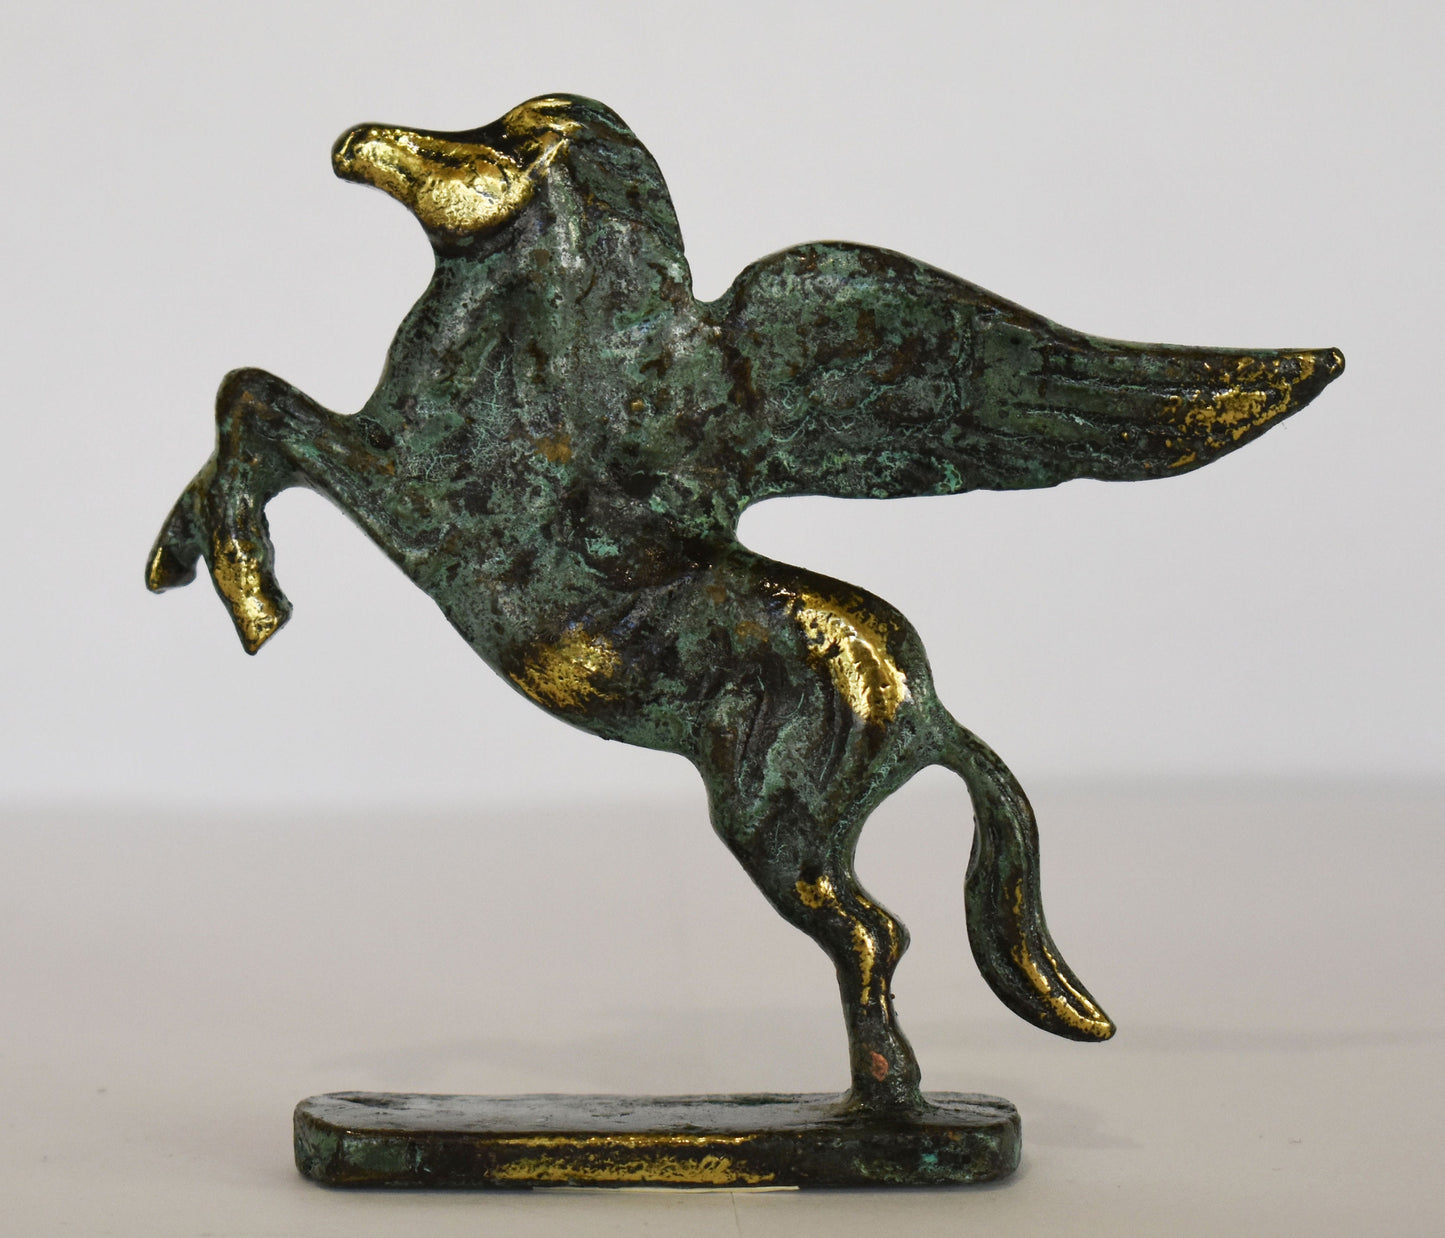 Pegasus - Mythical Immortal Winged Divine Horse - Bellerophon defeats Chimera - Constellation - Small - pure Bronze Sculpture